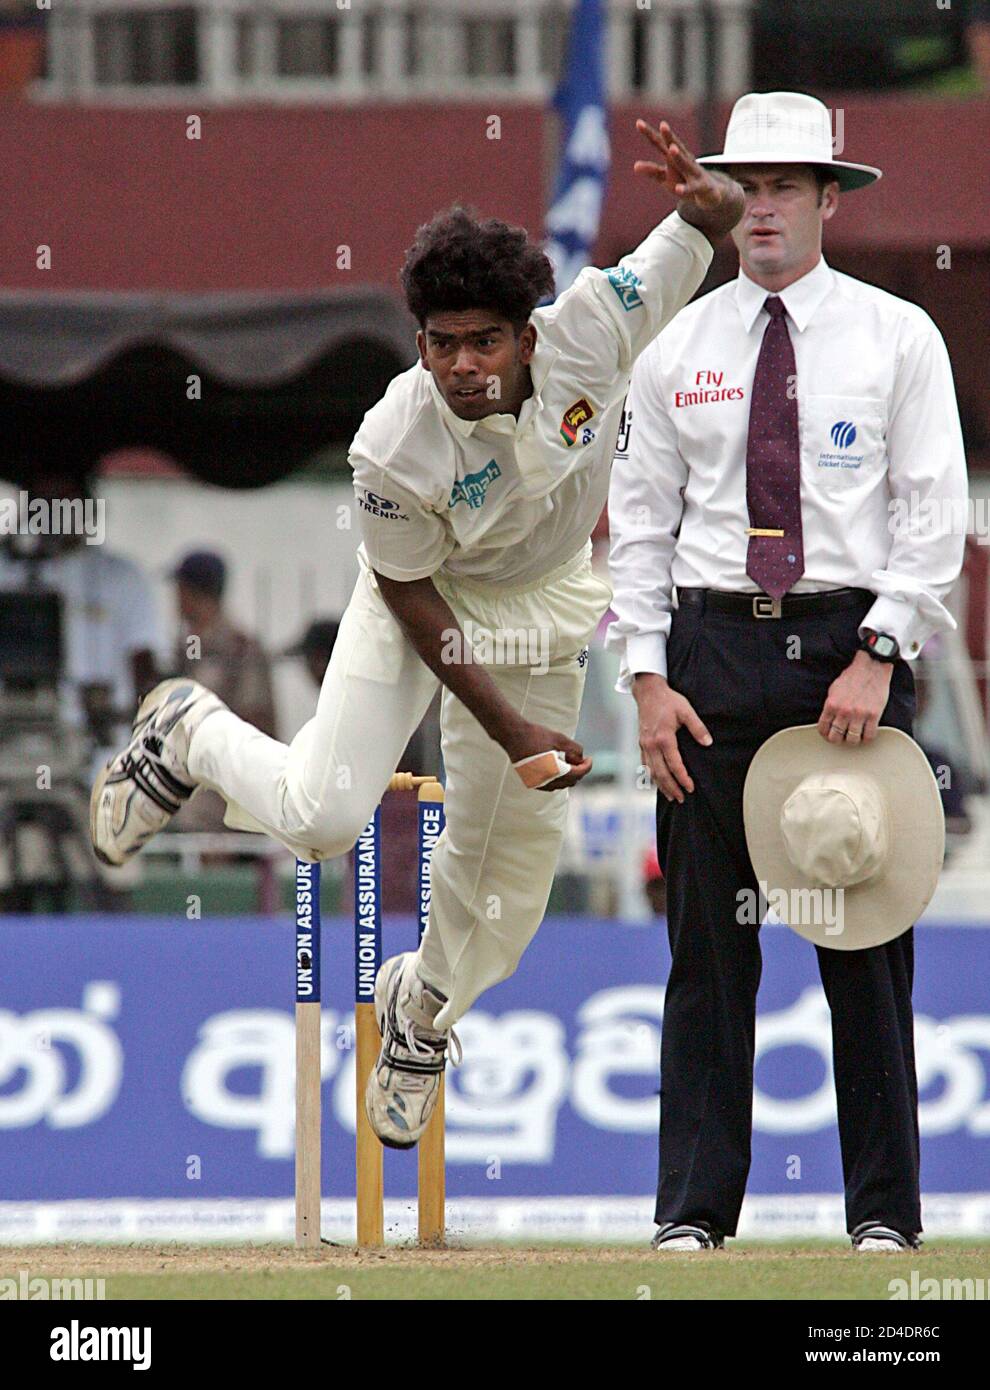 Sri Lankan bowler Malinga pitches a delivery during the cricket test match against West Indies in Colombo.  Sri Lankan bowler Lasith Malinga (L) pitches a delivery as Australian umpire Simon Taufel looks on during the second day of the first cricket test match against West Indies in Colombo July 14, 2005. West Indies were bowled out for 285 on the second morning of the first test against Sri Lanka at the Sinhalese Sports Club on Thursday. REUTERS/Anuruddha Lokuhapuarachchi Stock Photo